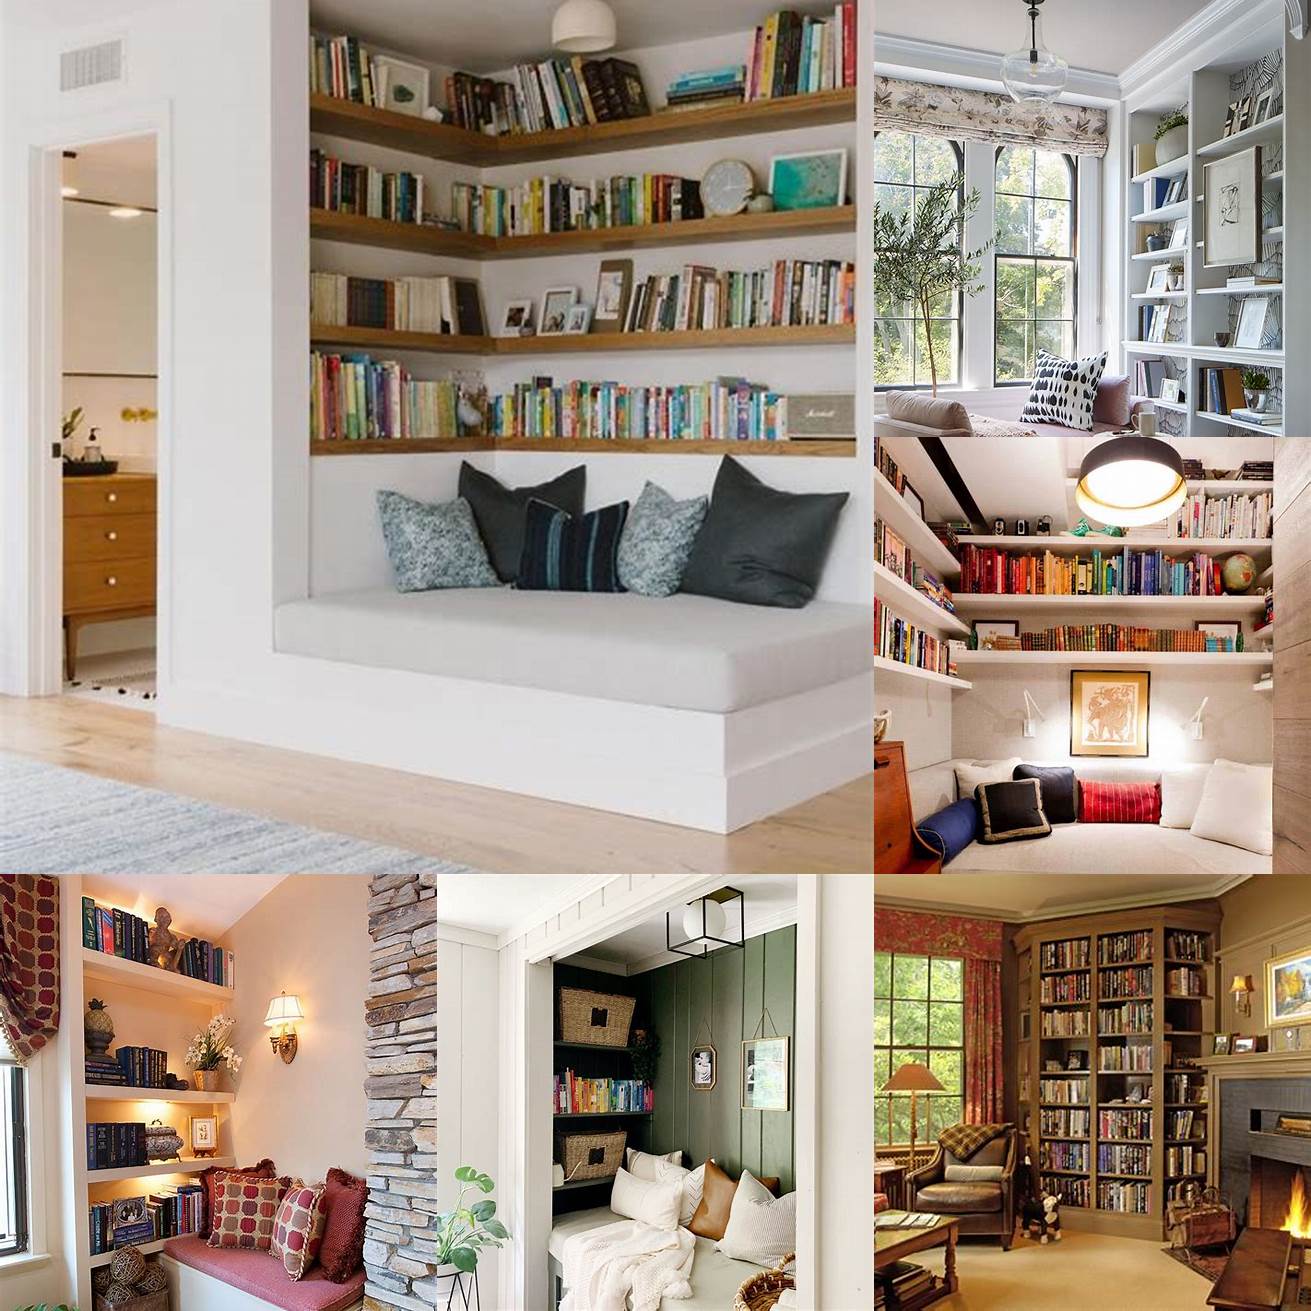 A cozy reading nook with bookshelves